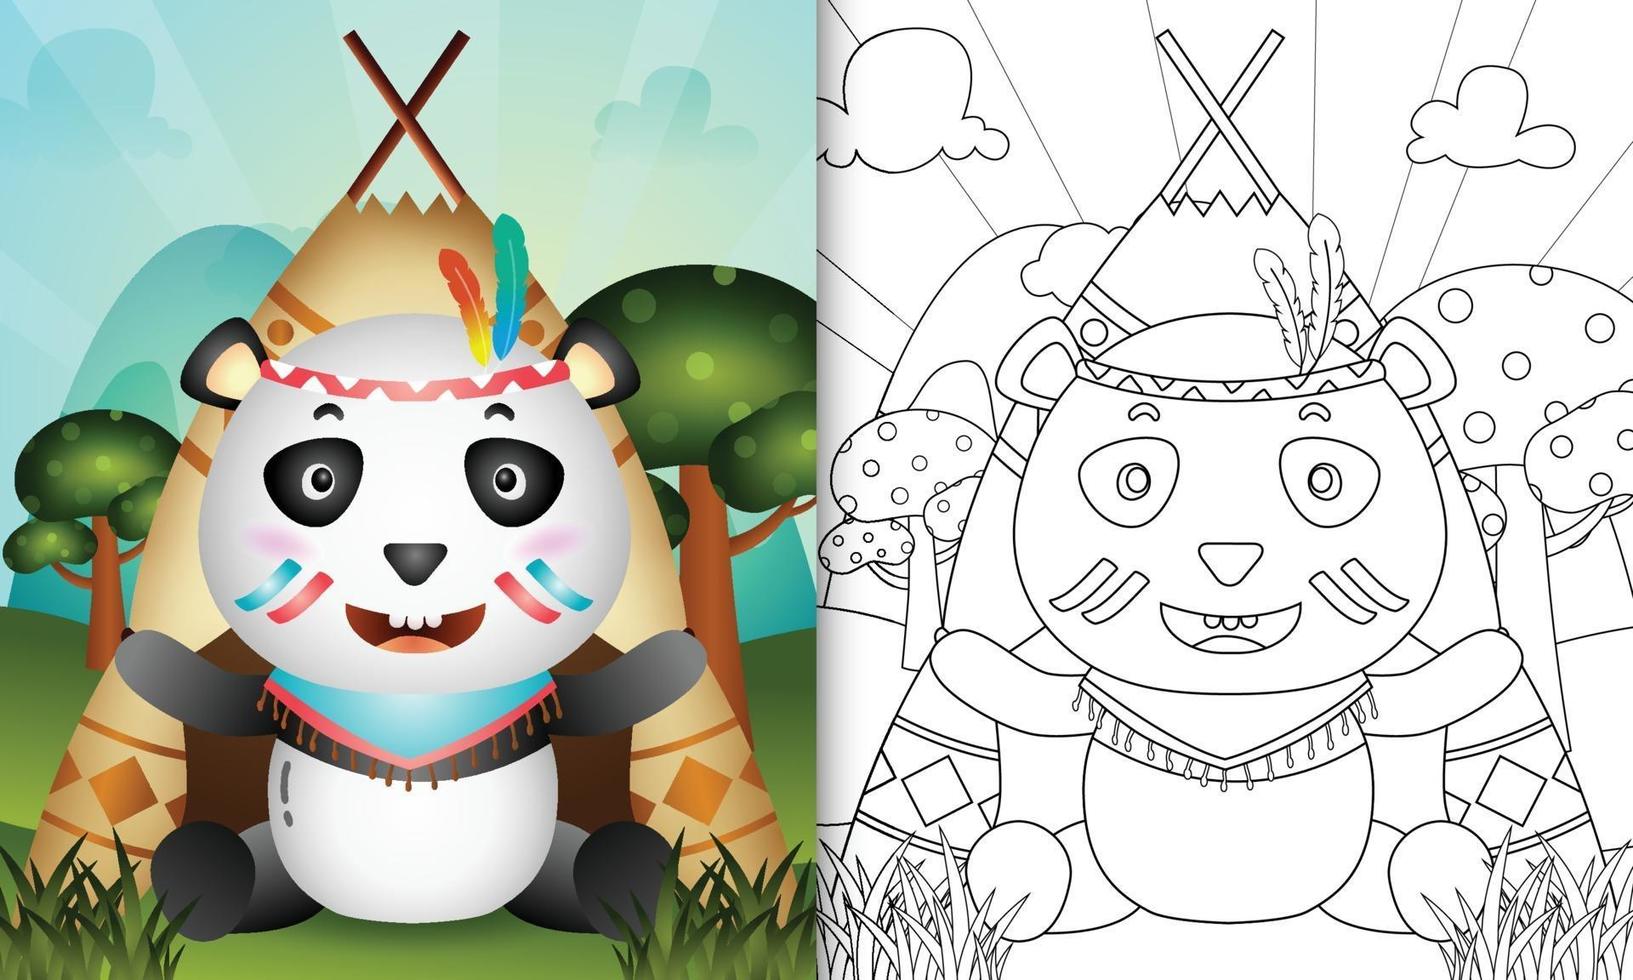 Coloring book template for kids with a cute tribal boho panda character illustration vector